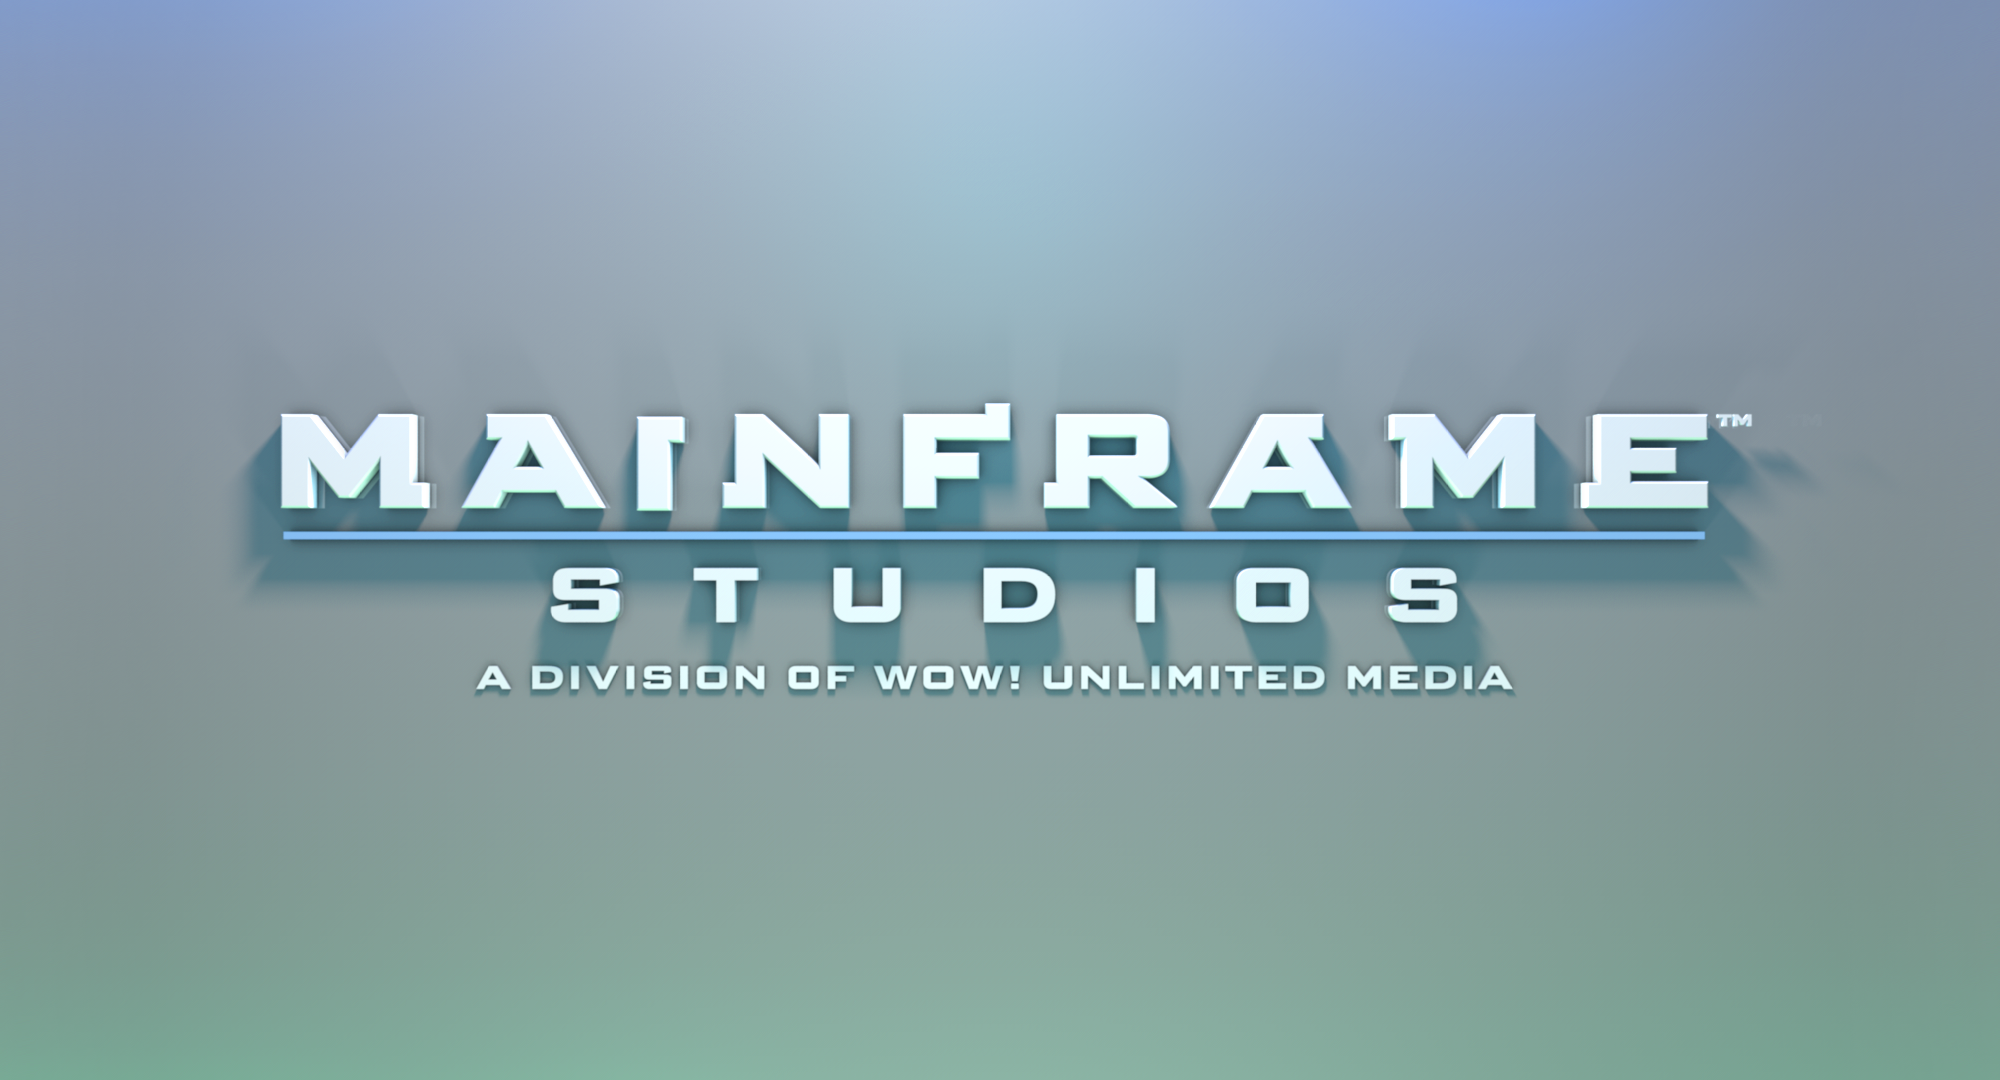 Press Release Archives - Mainframe Studios